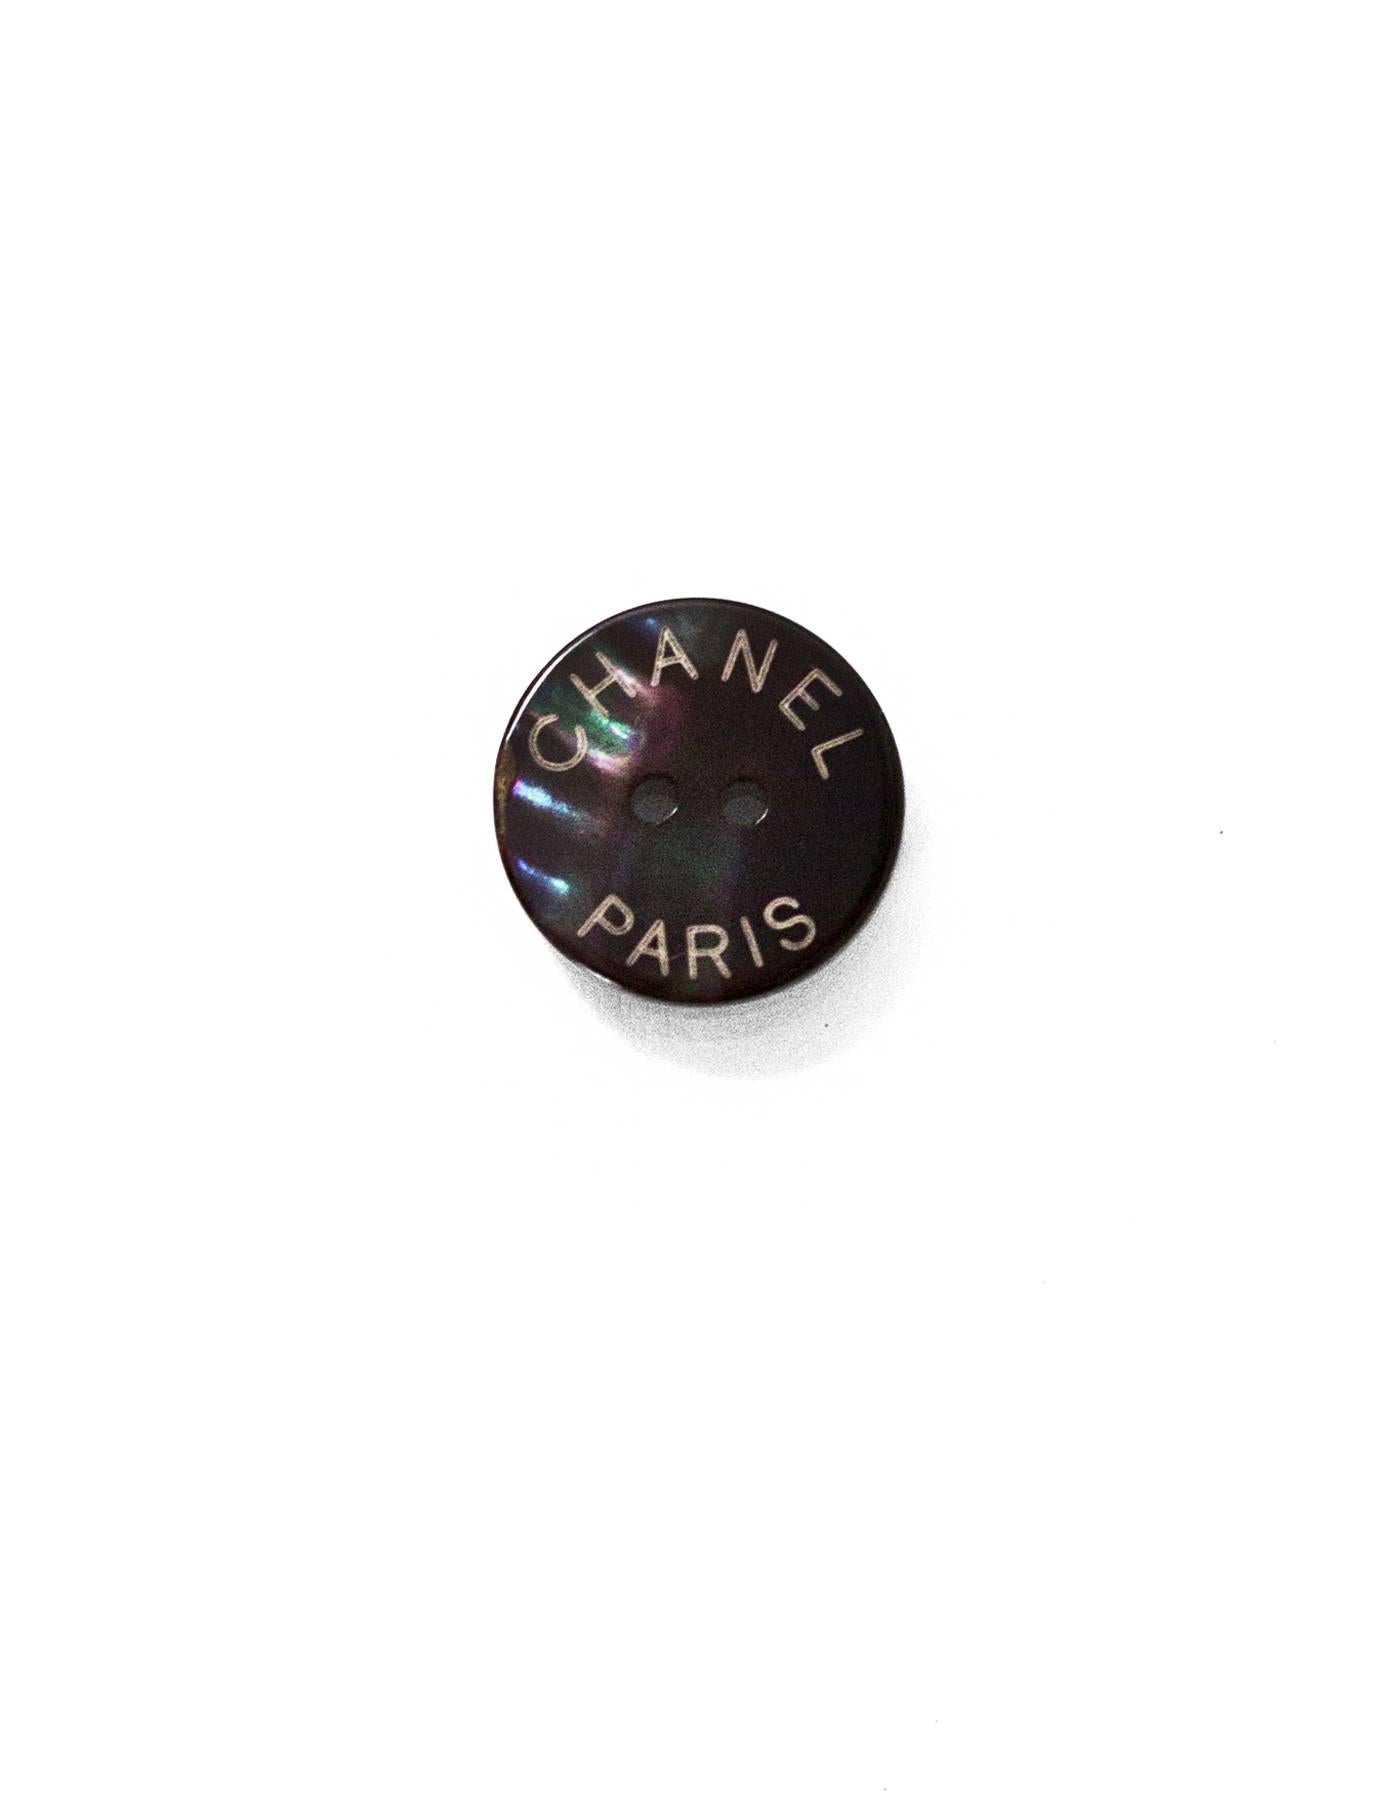 Chanel Iridescent CHANEL PARIS Glass Buttons
Features six 18mm buttons

Color: Grey
Materials: Glass
Stamp: Chanel Paris
Overall Condition: Excellent good pre-owned condition, light surface marks

Measurements: 
Diameter: 18mm